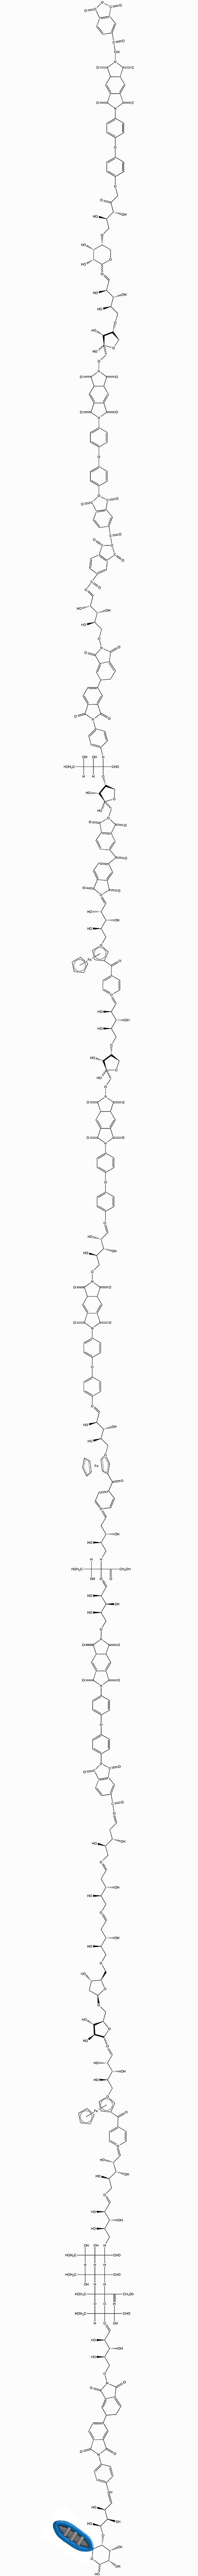 Raft Material Chemical Structure